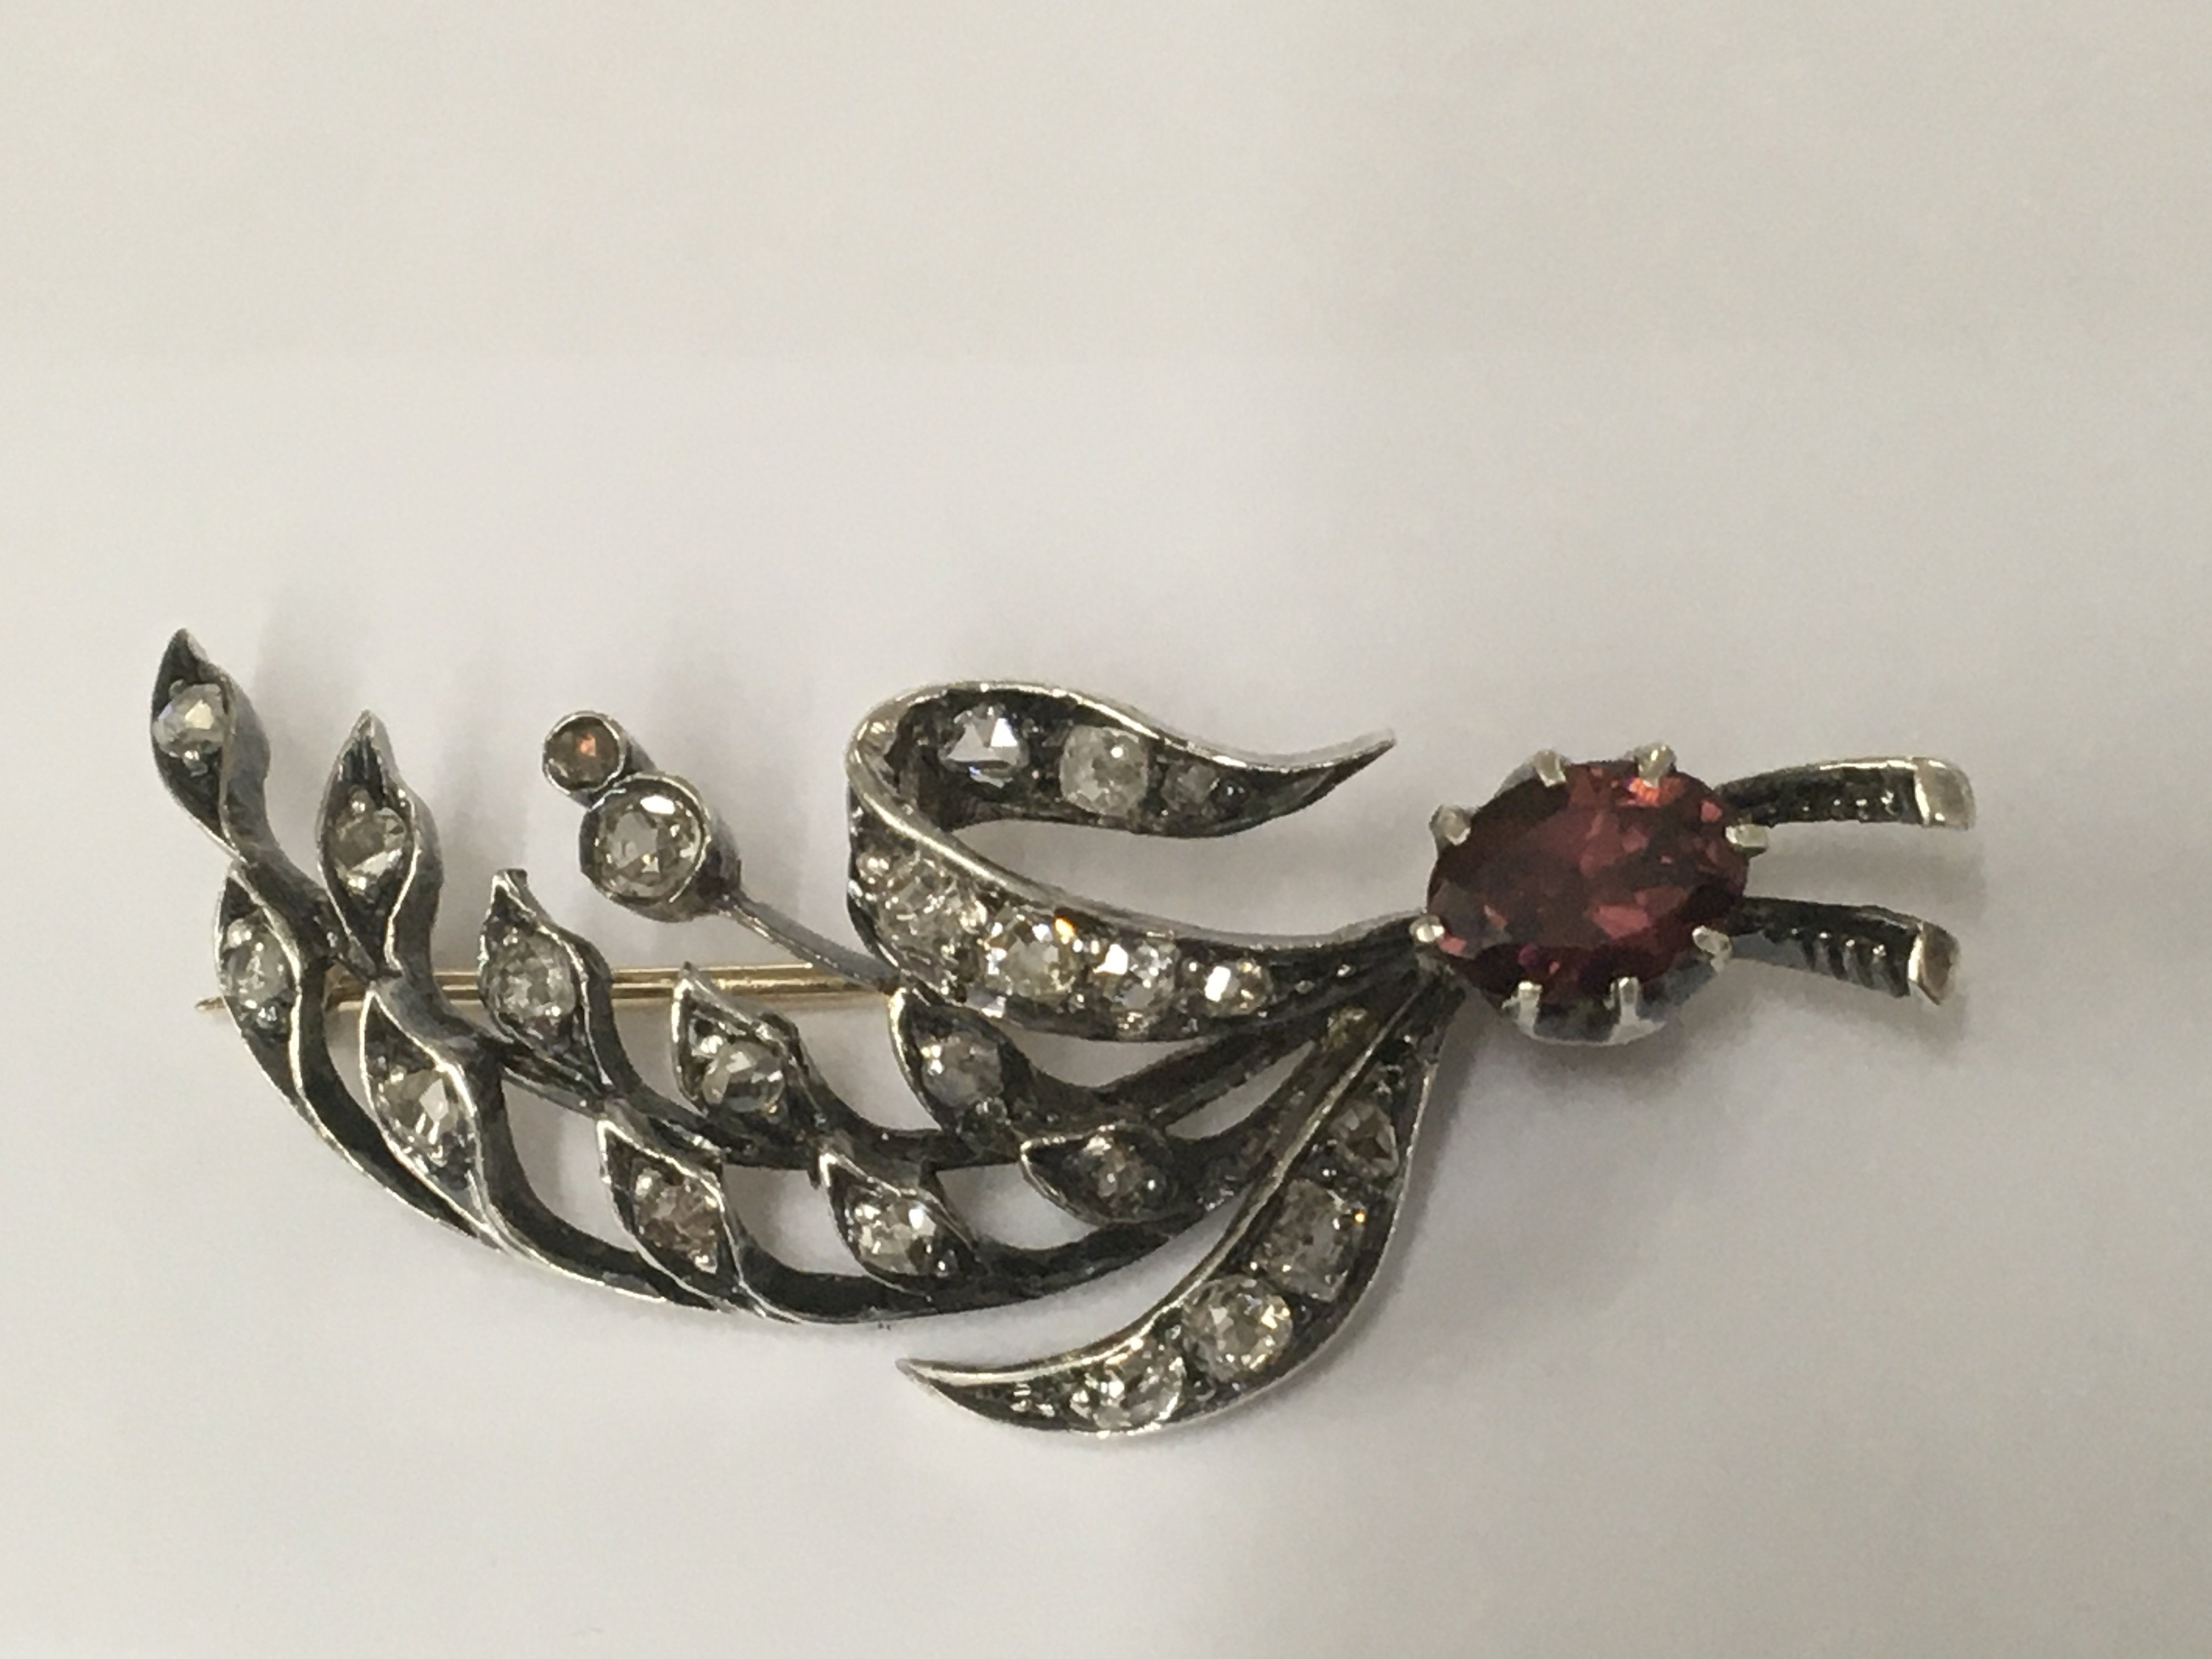 An antique brooch in the form of a spray of flower